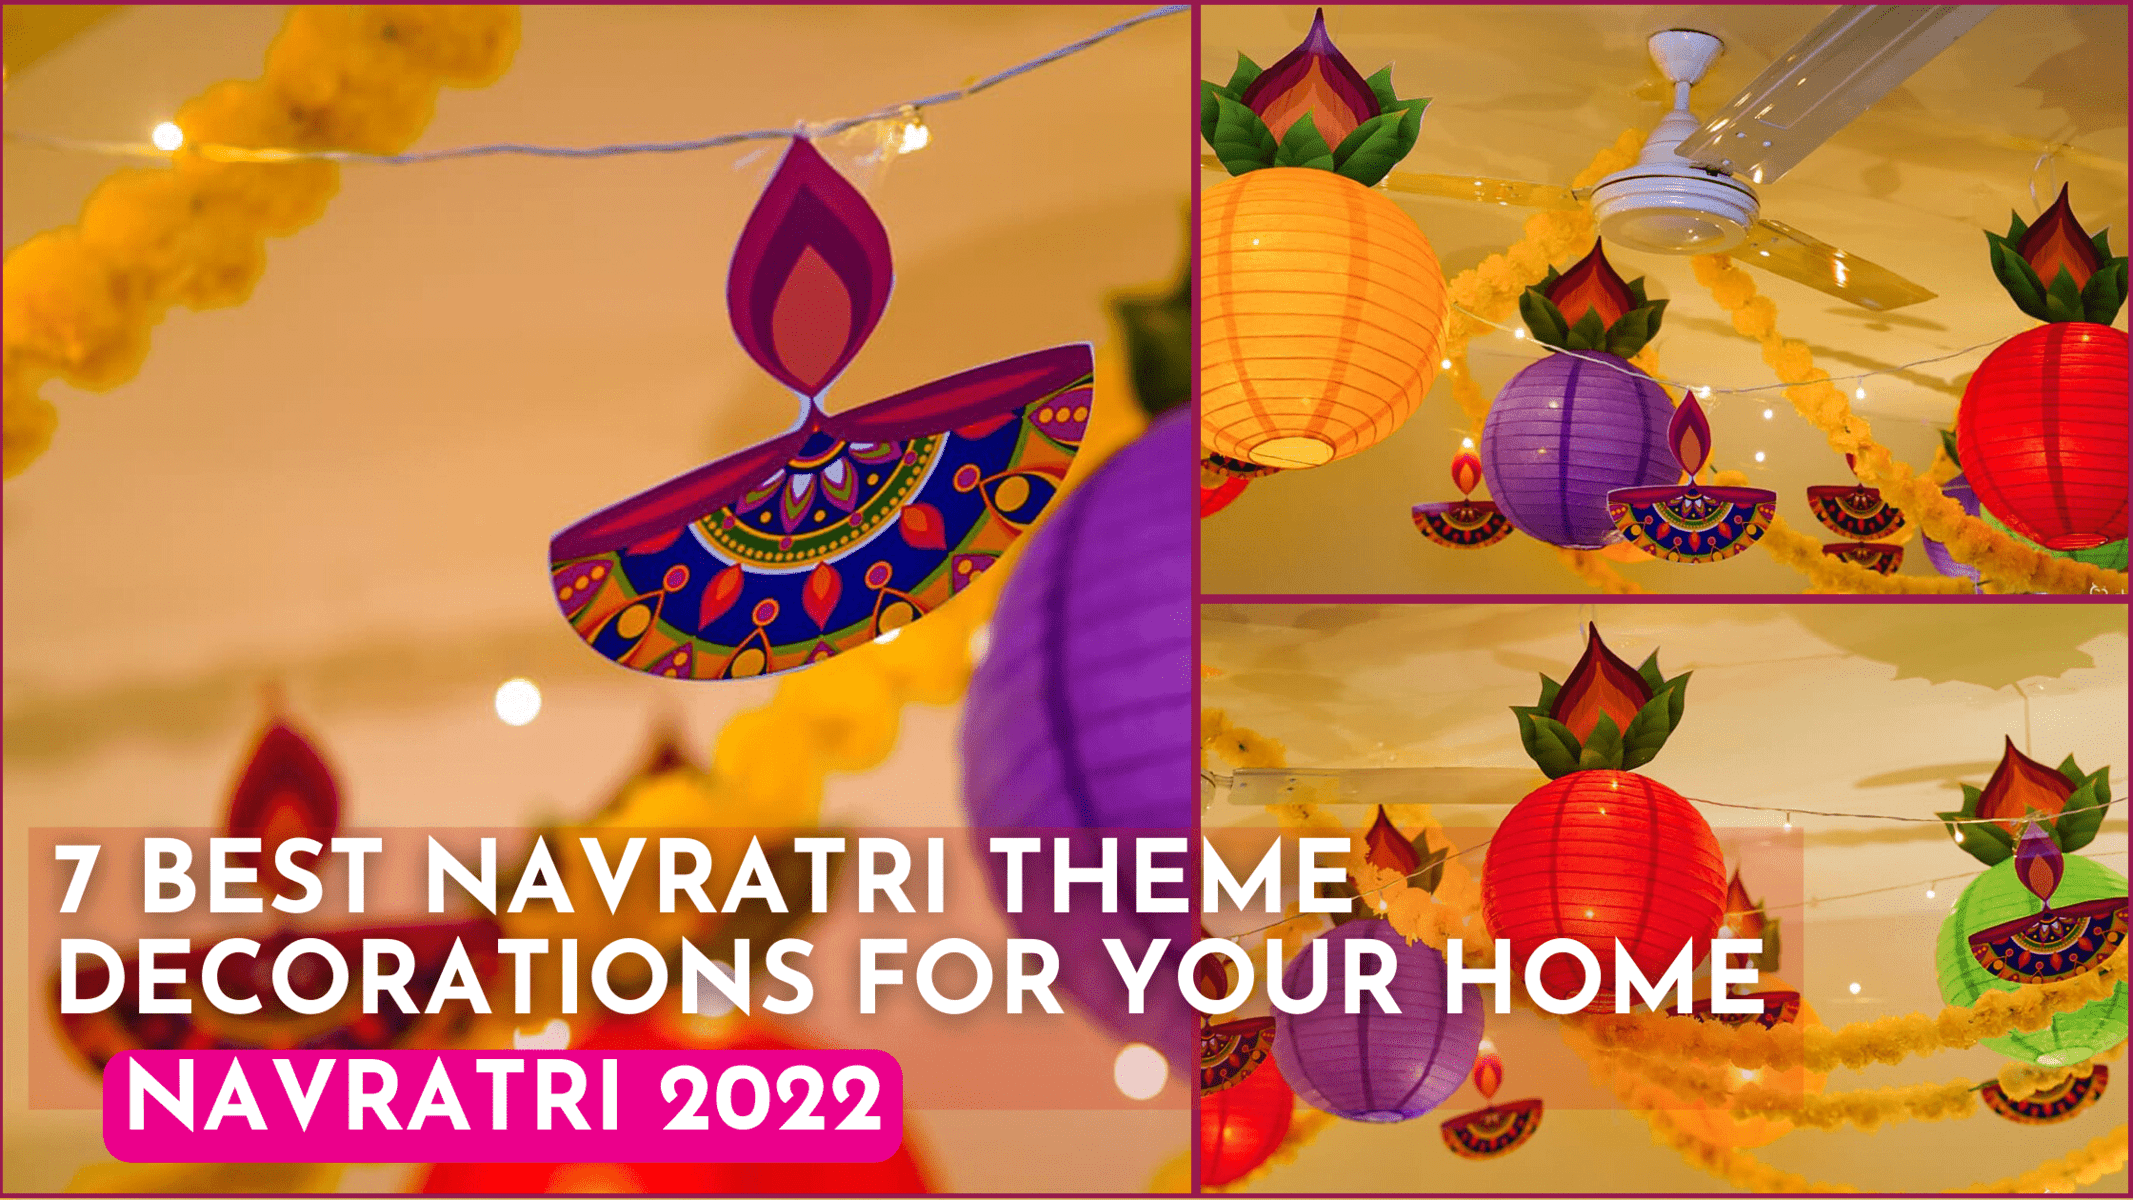 7 Best Navratri Theme Decorations for your Home (with Pictures): Navratri 2022